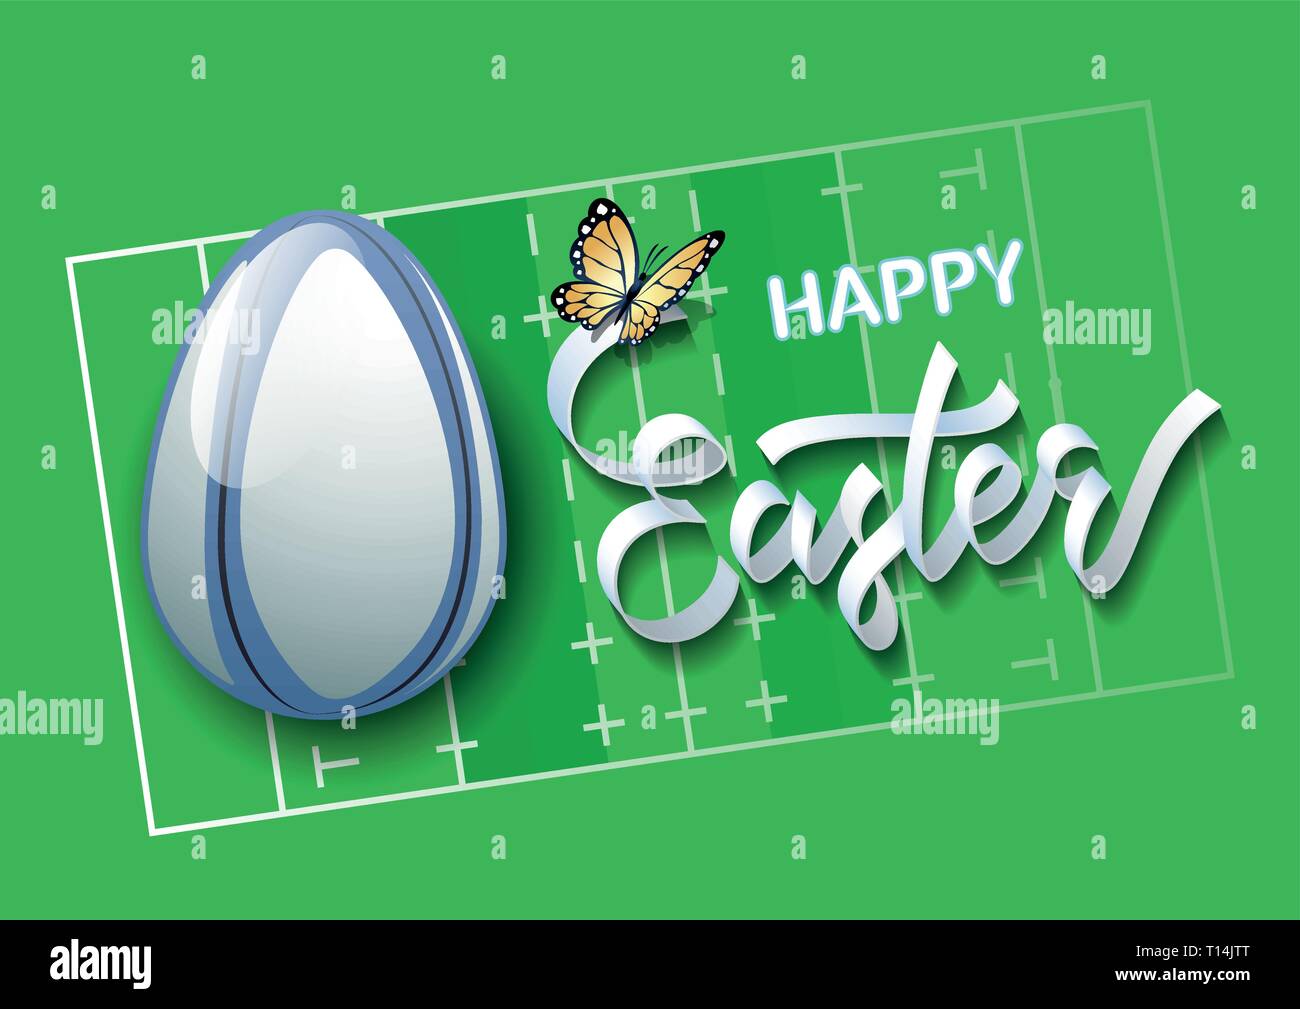 Happy Easter. Easter egg in the form of a rugby ball on a rugby field background. Vector illustration. Stock Vector